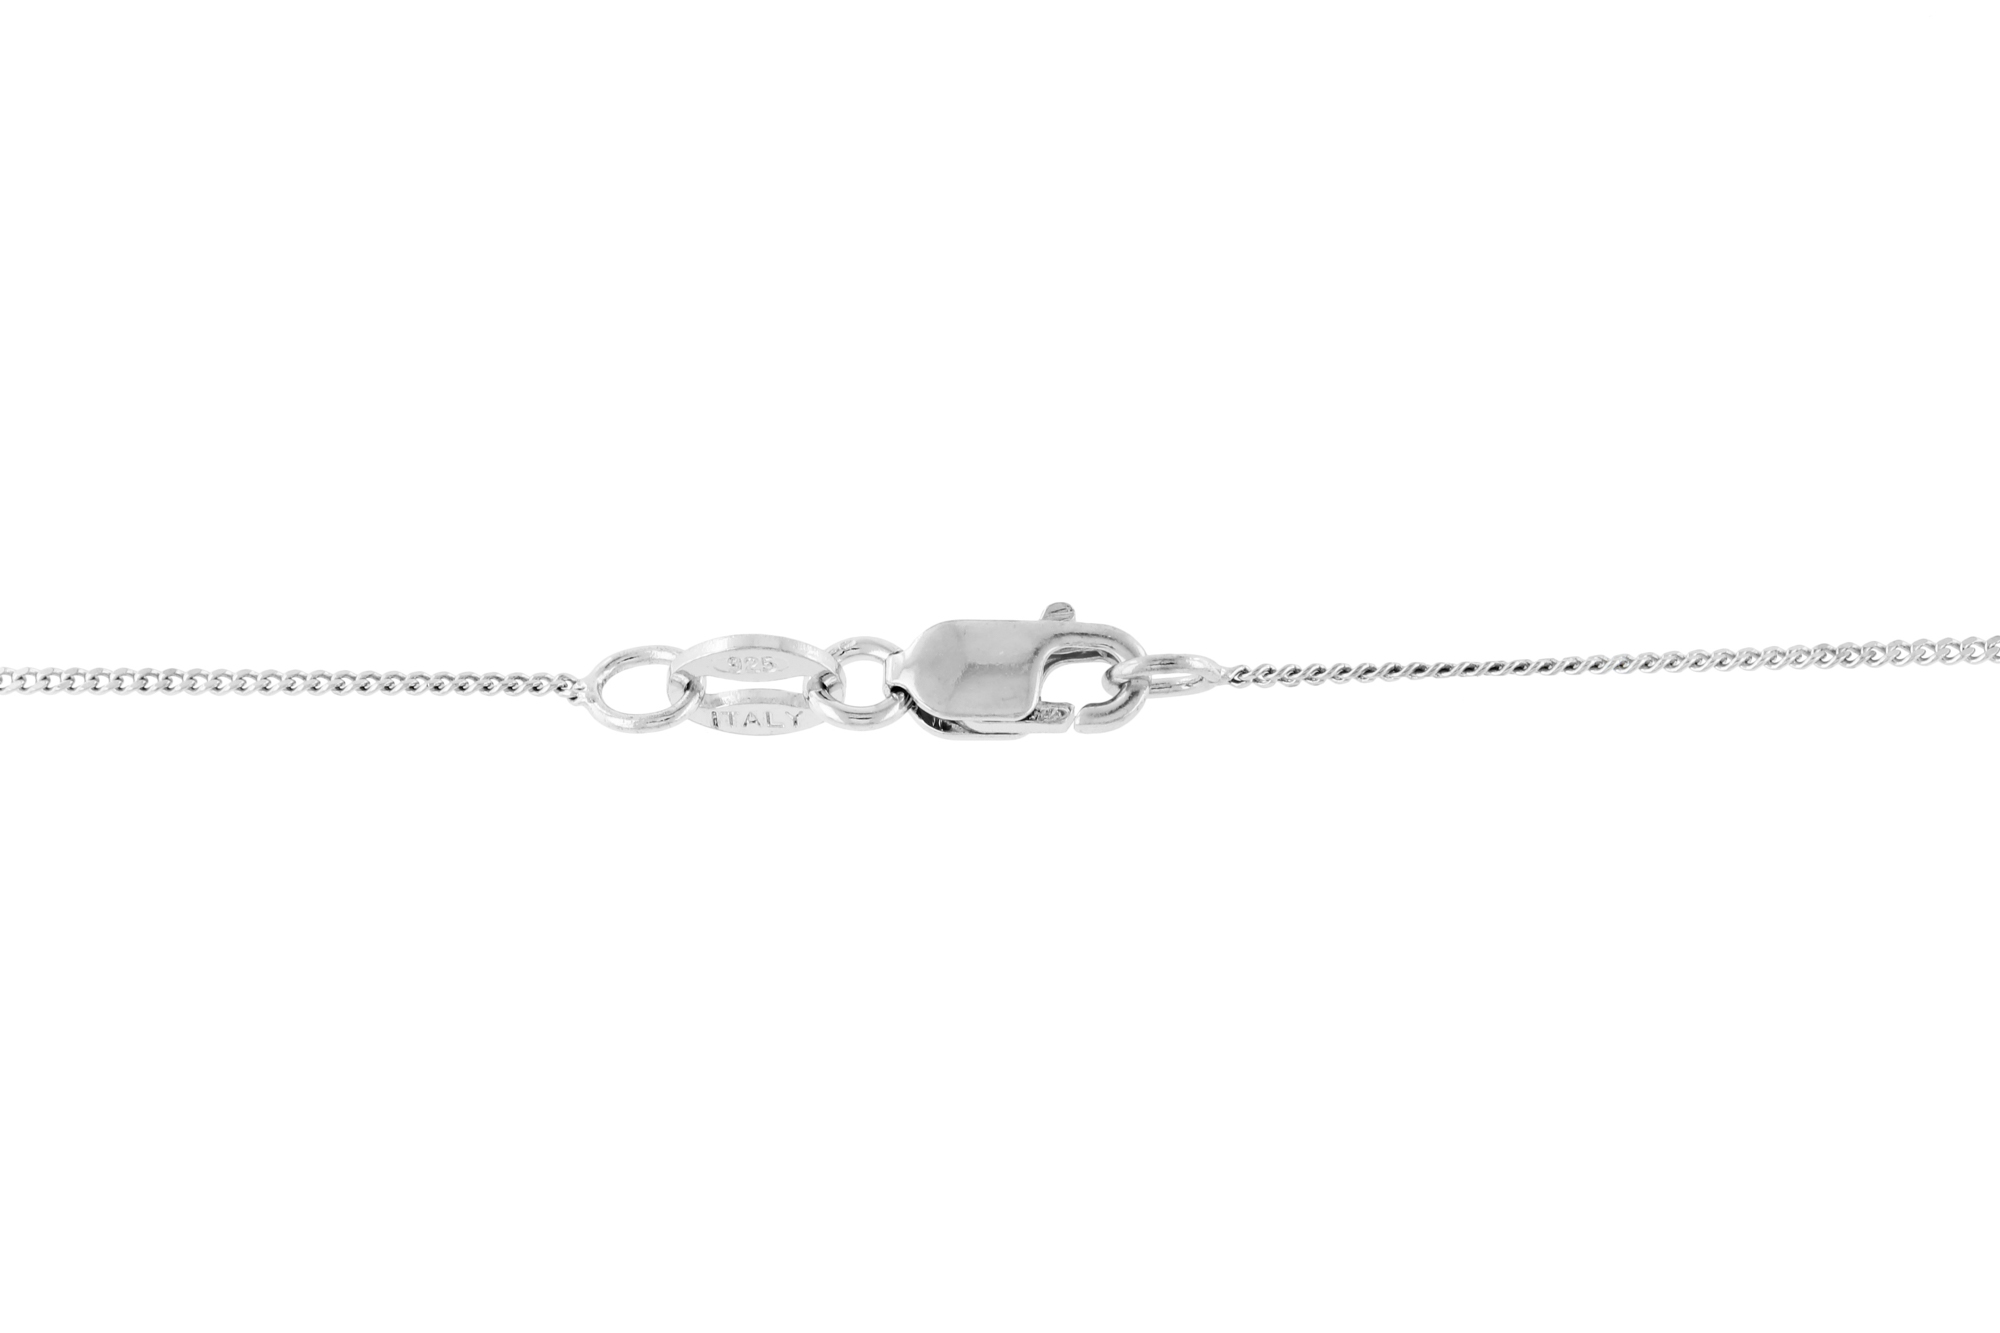 Replace & Rejoice: Easily Rejuvenate Your Jewellery with Clasp Replacement | Gillian’s Jewellery